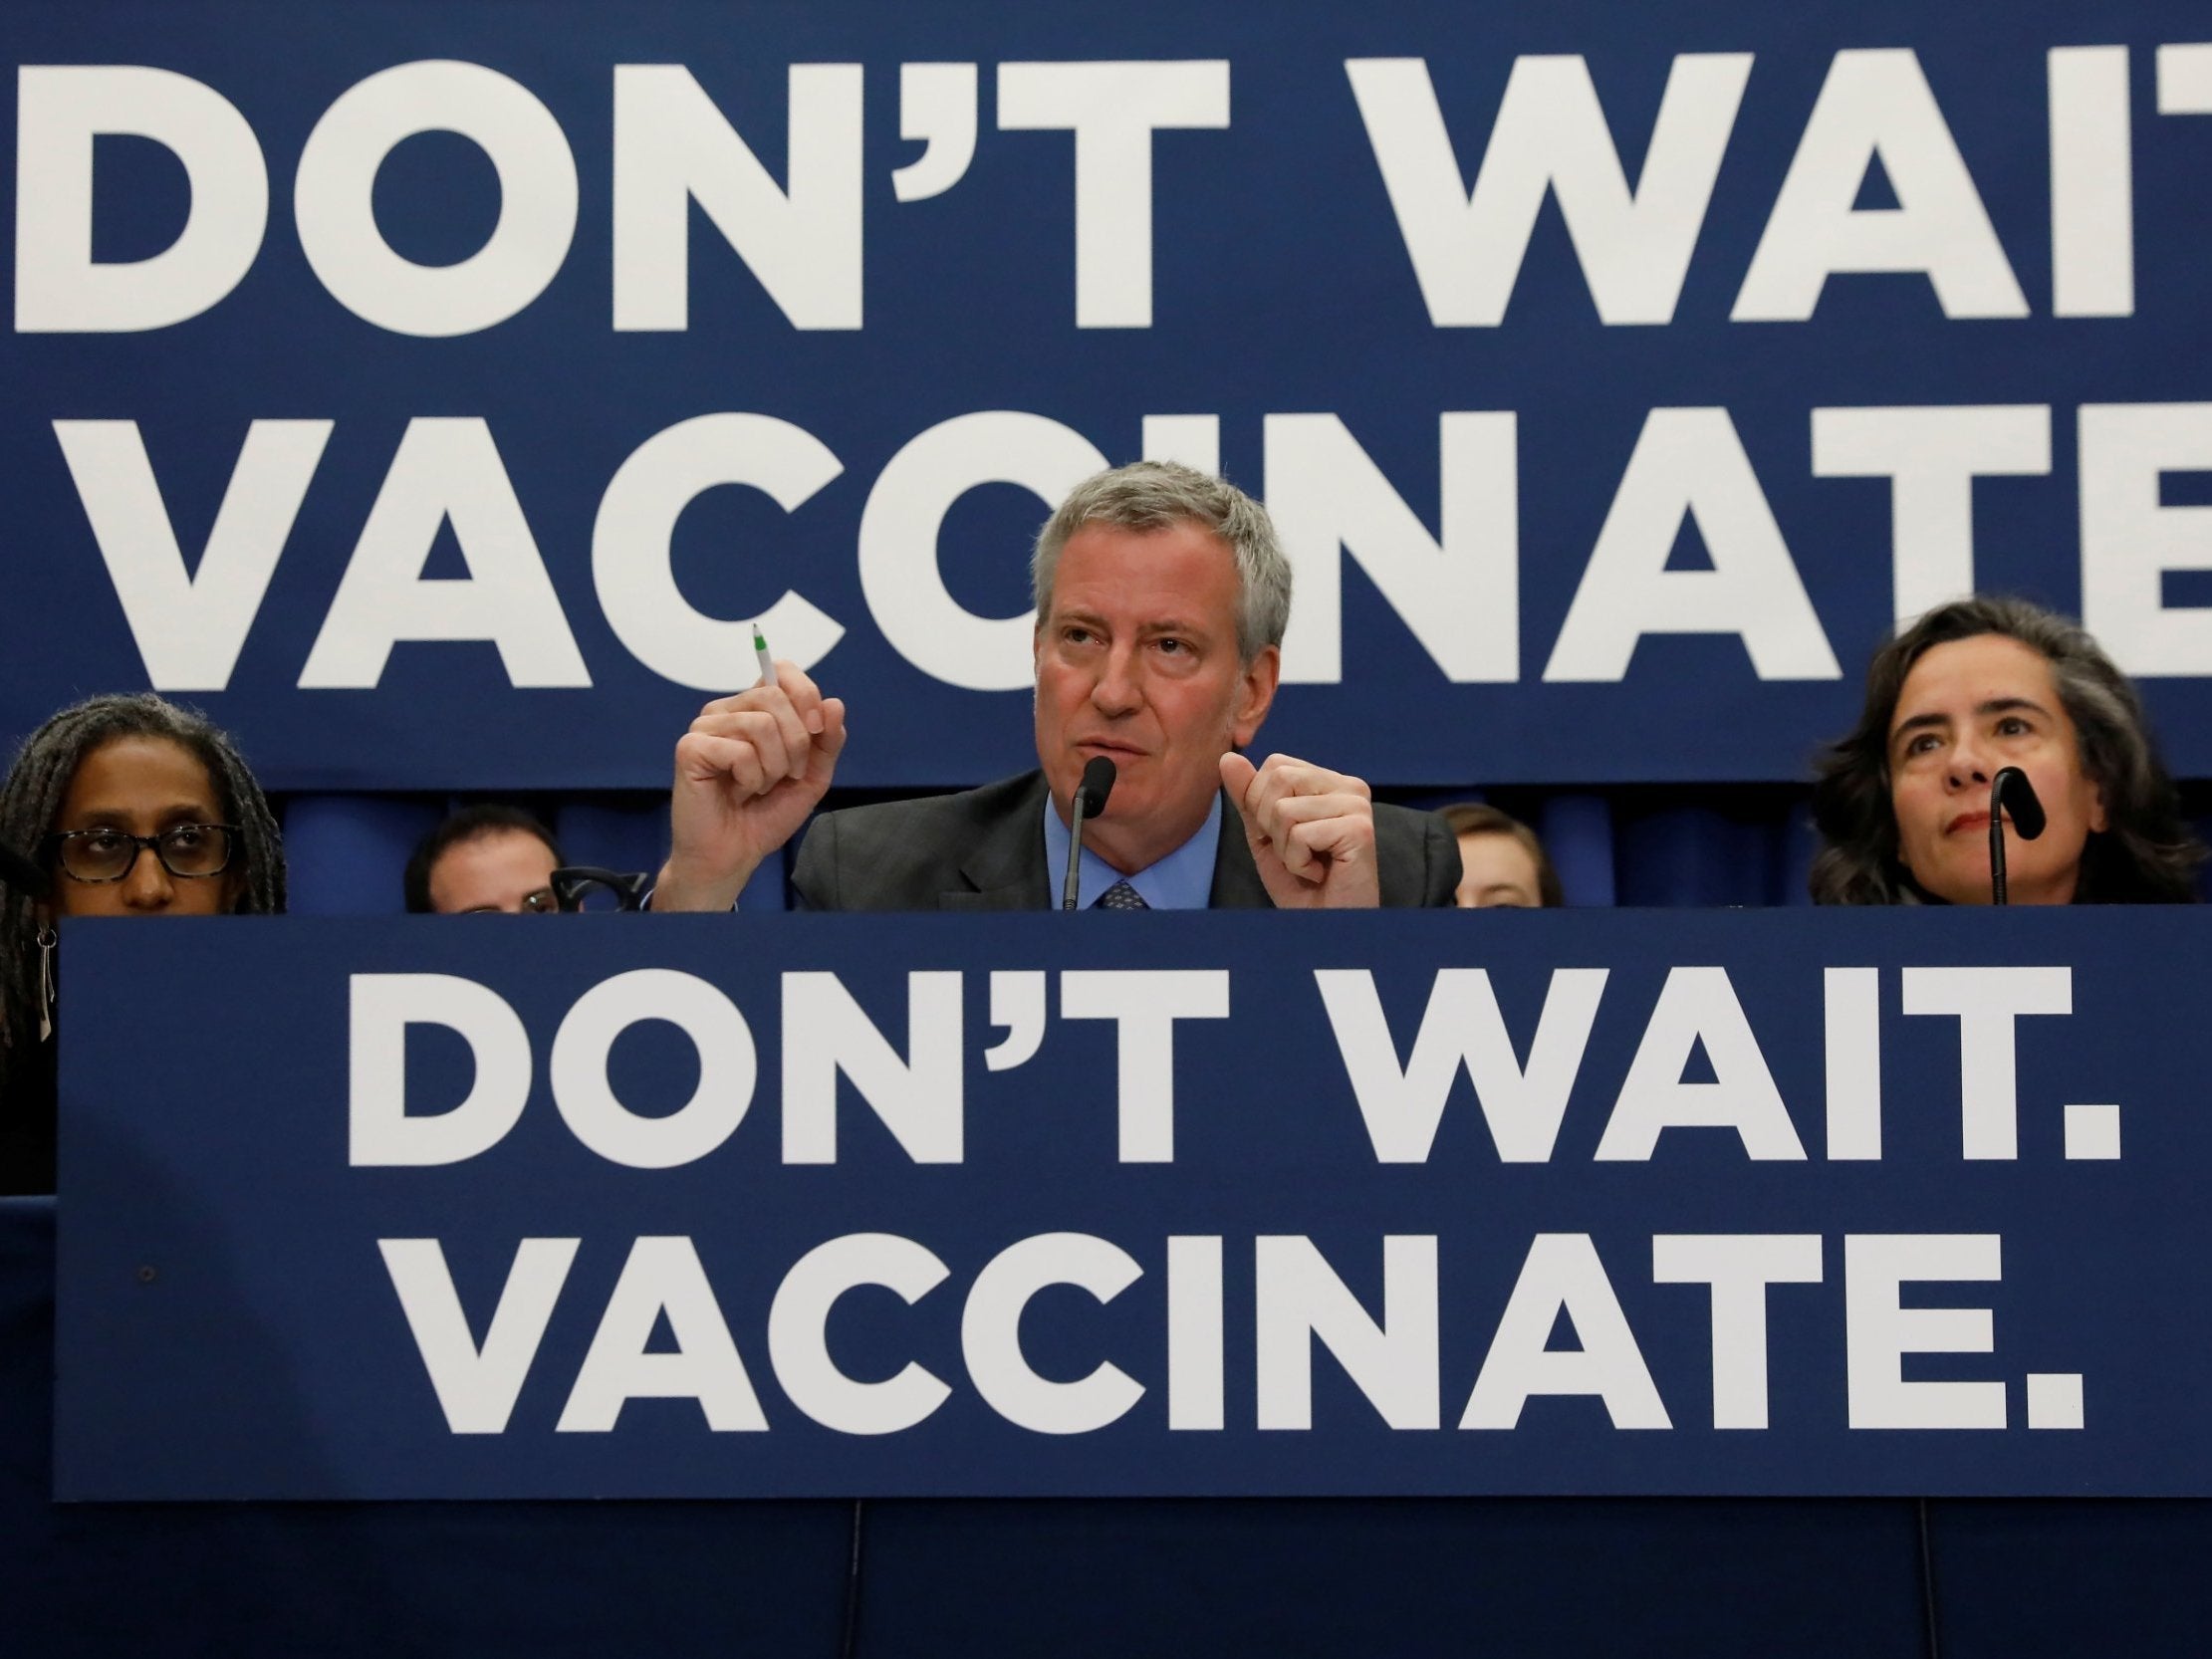 New York City Mayor Bill de Blasio speaks during a news conference declaring a public health emergency in parts of Brooklyn in response to a measles outbreak, requiring non-vaccinated people living in affected areas to get the vaccine or face fines, in the Orthodox Jewish community of the Williamsburg neighborhood, Brooklyn, New York City, US, 9 April 2019.